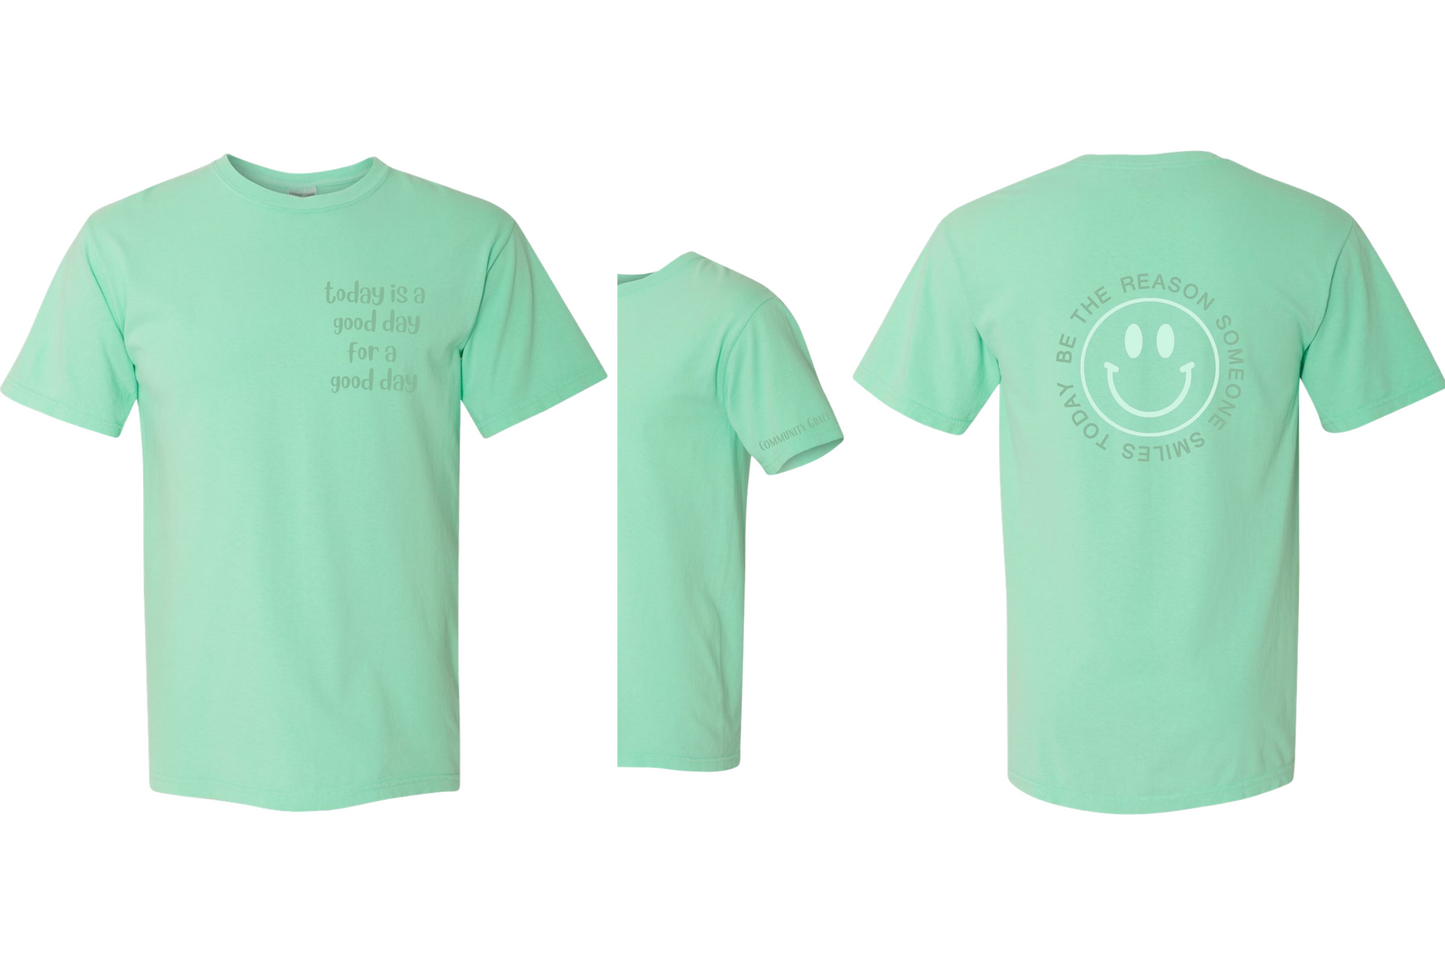 mint green short sleeve shirt with "today is a good day for a good day" on the left chest area of the shirt and Community Grace on the sleeve in dark mint green tones. On the back of the shirt there is a smiley face in a vibrant mint green color with the words "BE THE REASON SOMEONE SMILES TODAY" around it in capital letters in a darker mint green tone